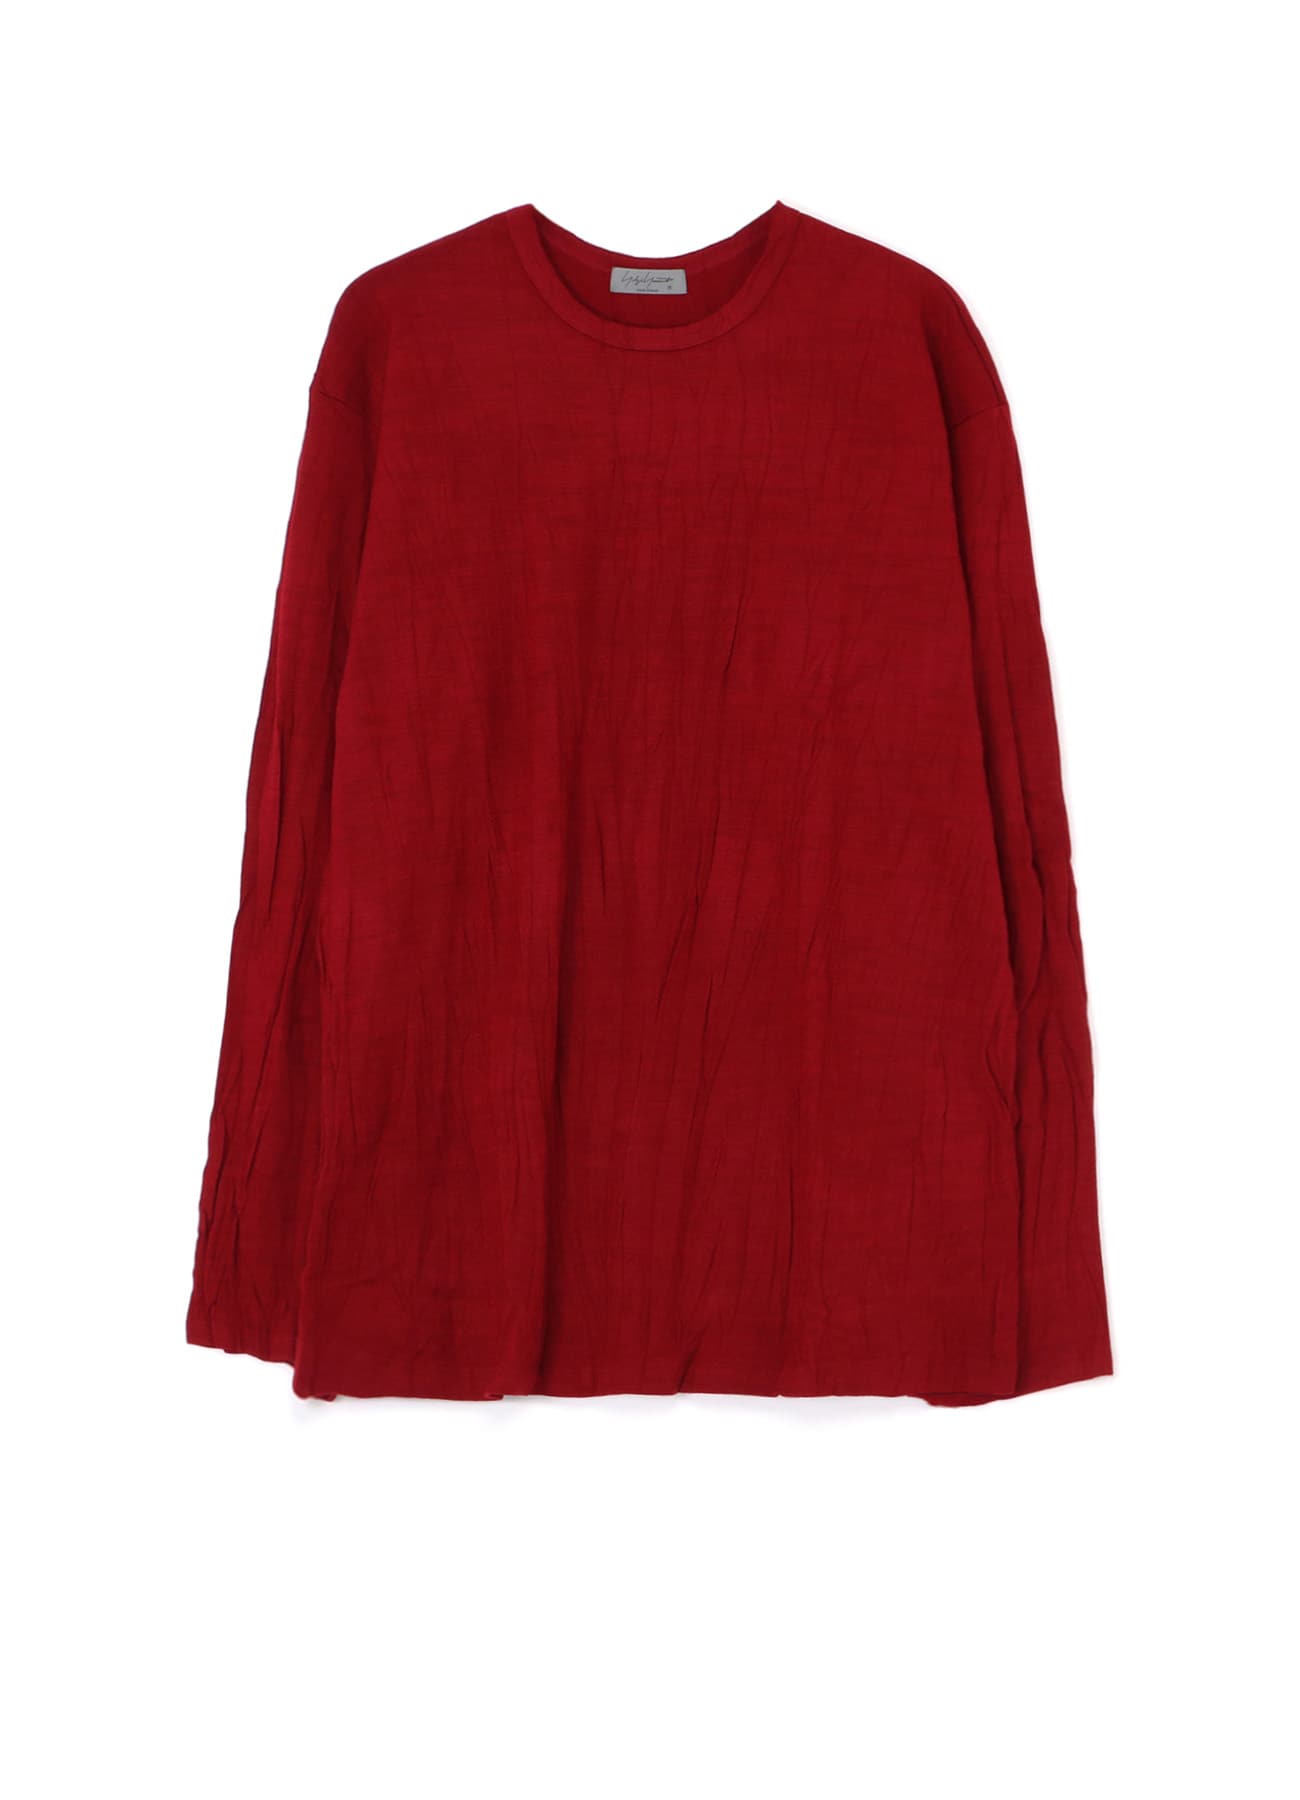 WRINKLED WOOL ROUND NECK T-SHIRT